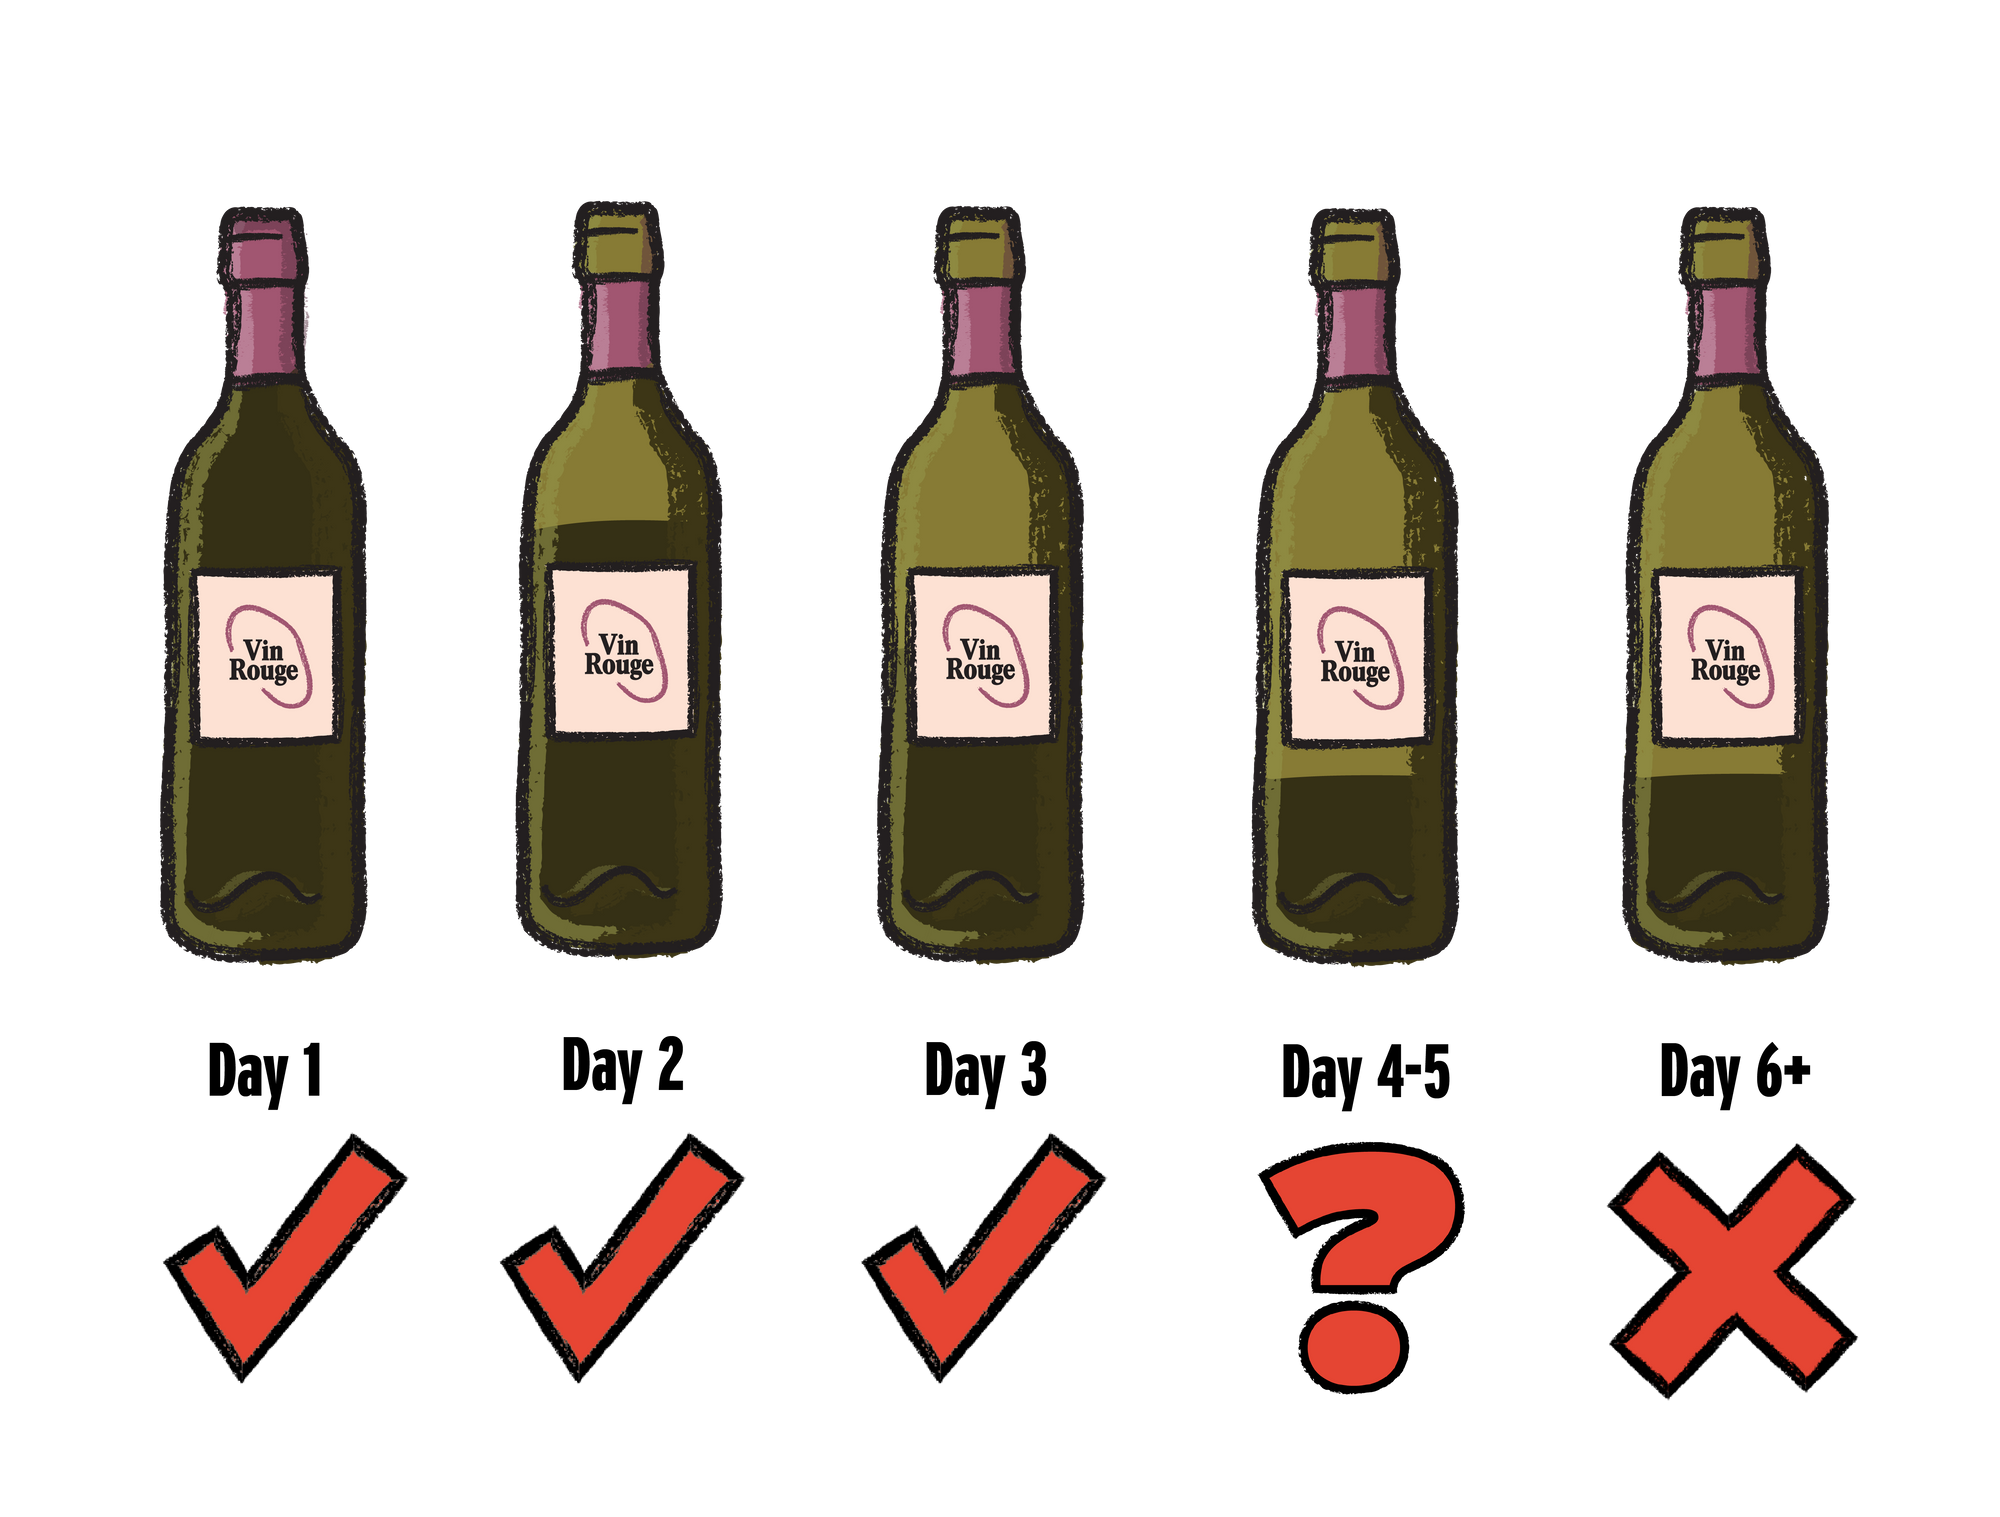 Why Does Open Wine Go Bad So Quickly? And What Can I Do to Preserve It